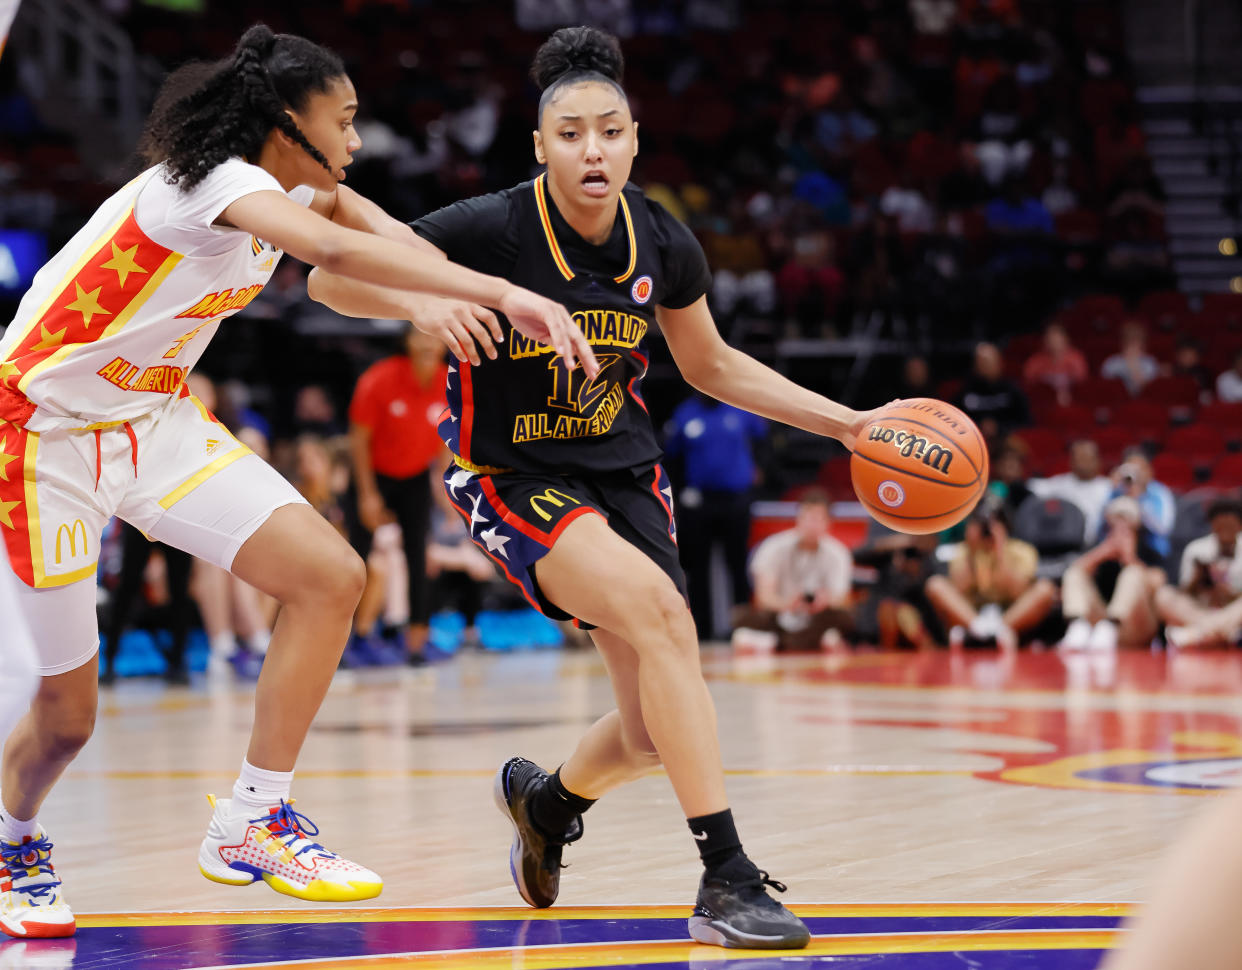 JuJu Watkins, shown during the 2023 McDonald's All-American Game in March, will provide a boost for USC coming in as the No. 1 recruit. (Photo by Michael Hickey/Getty Images)